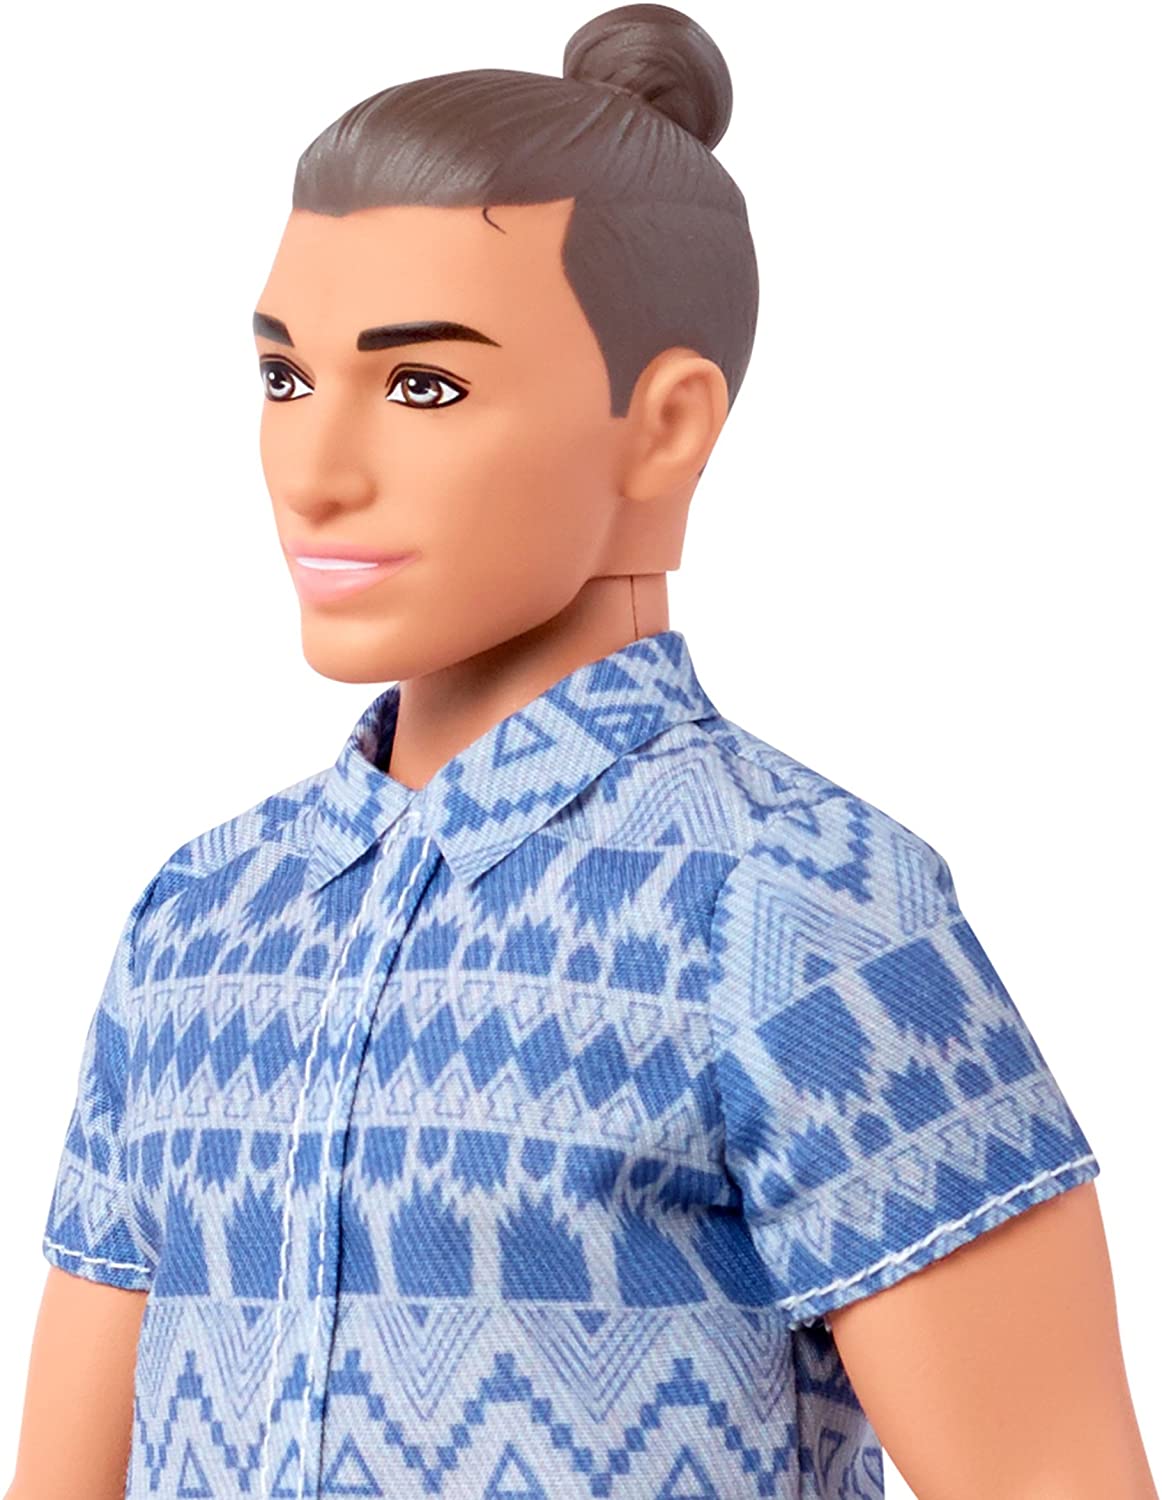 Images of Ryan appear in 2010 Ken doll fashion packs(pictured below) as wel...